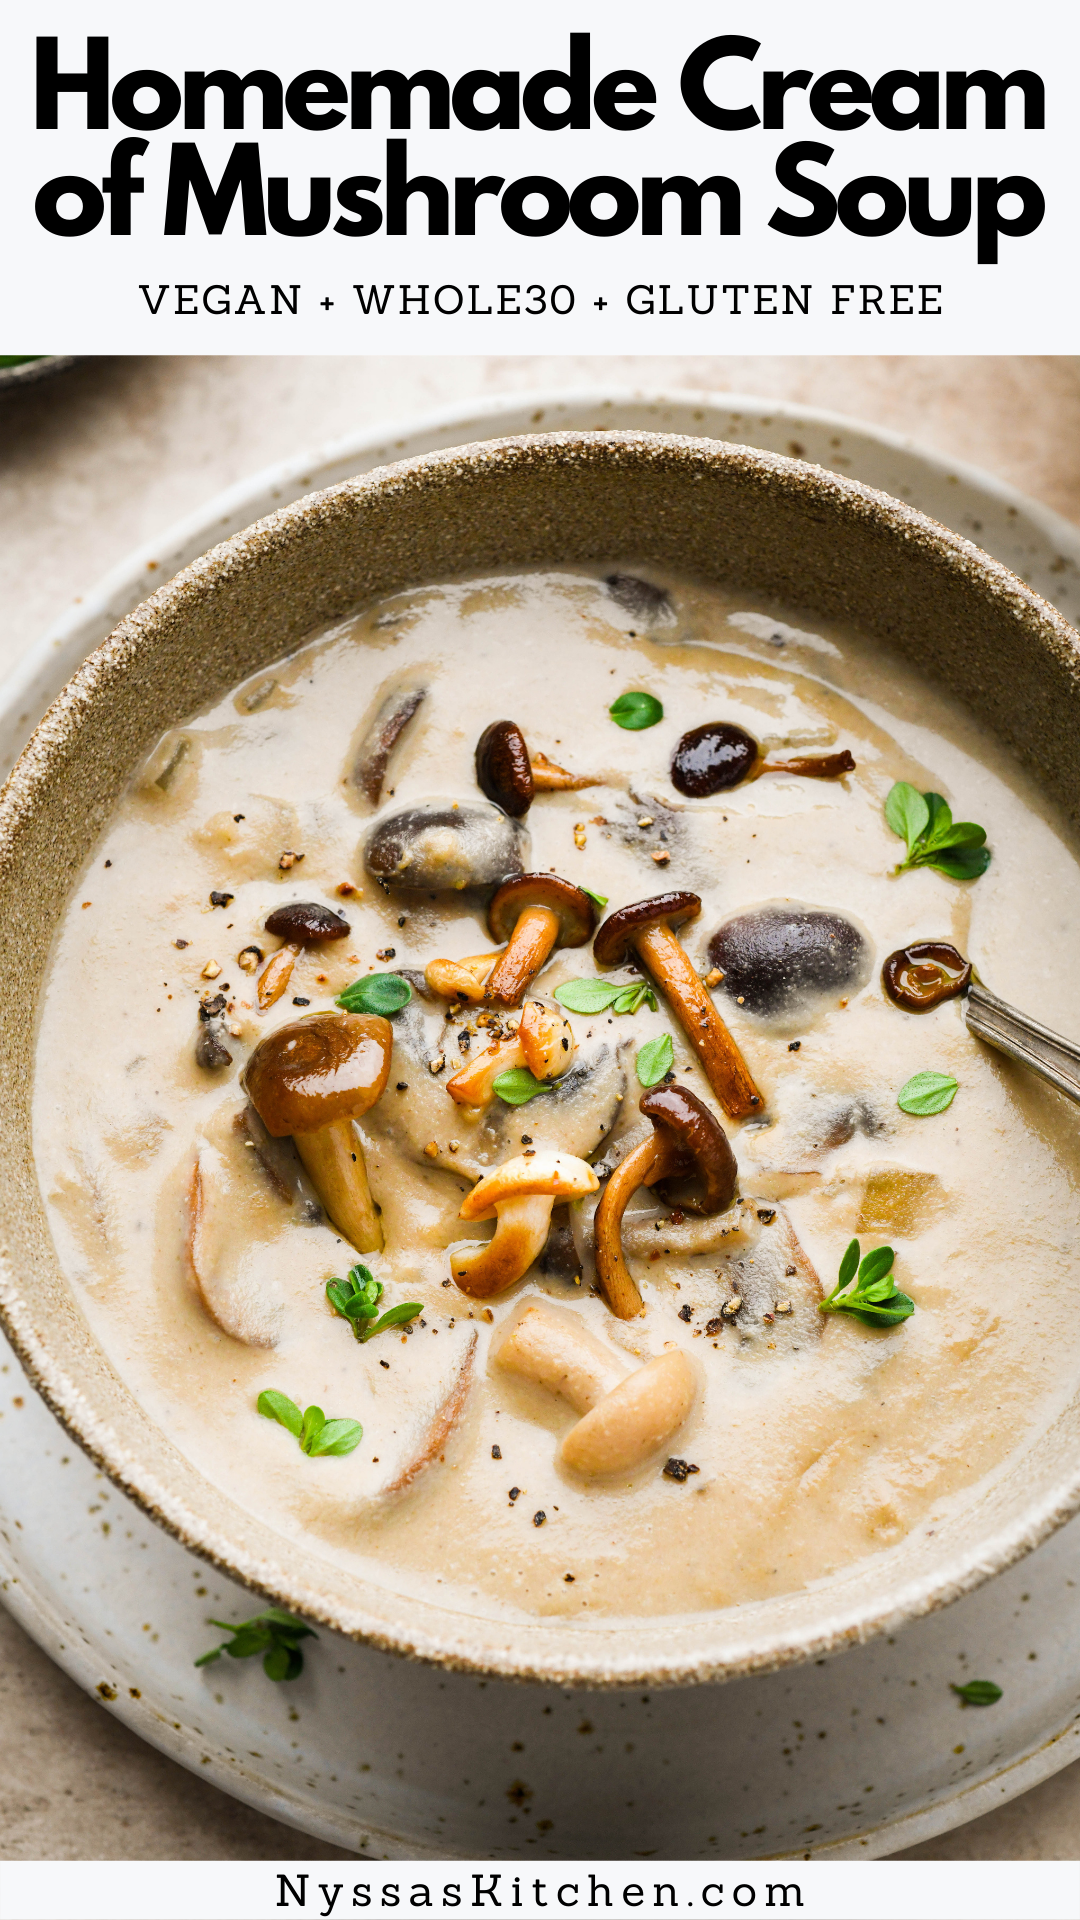 This simple and dairy free cream of mushroom soup an elevated alternative to store bought options. Made with lots of mushrooms, cashews instead of heavy cream, aromatics, and a few "secret" umami boosting ingredients for tons of savory flavor. Perfect on it's own or as a base for your favorite comfort food recipes. Gluten free, dairy free, vegan, and Whole30 compatible.